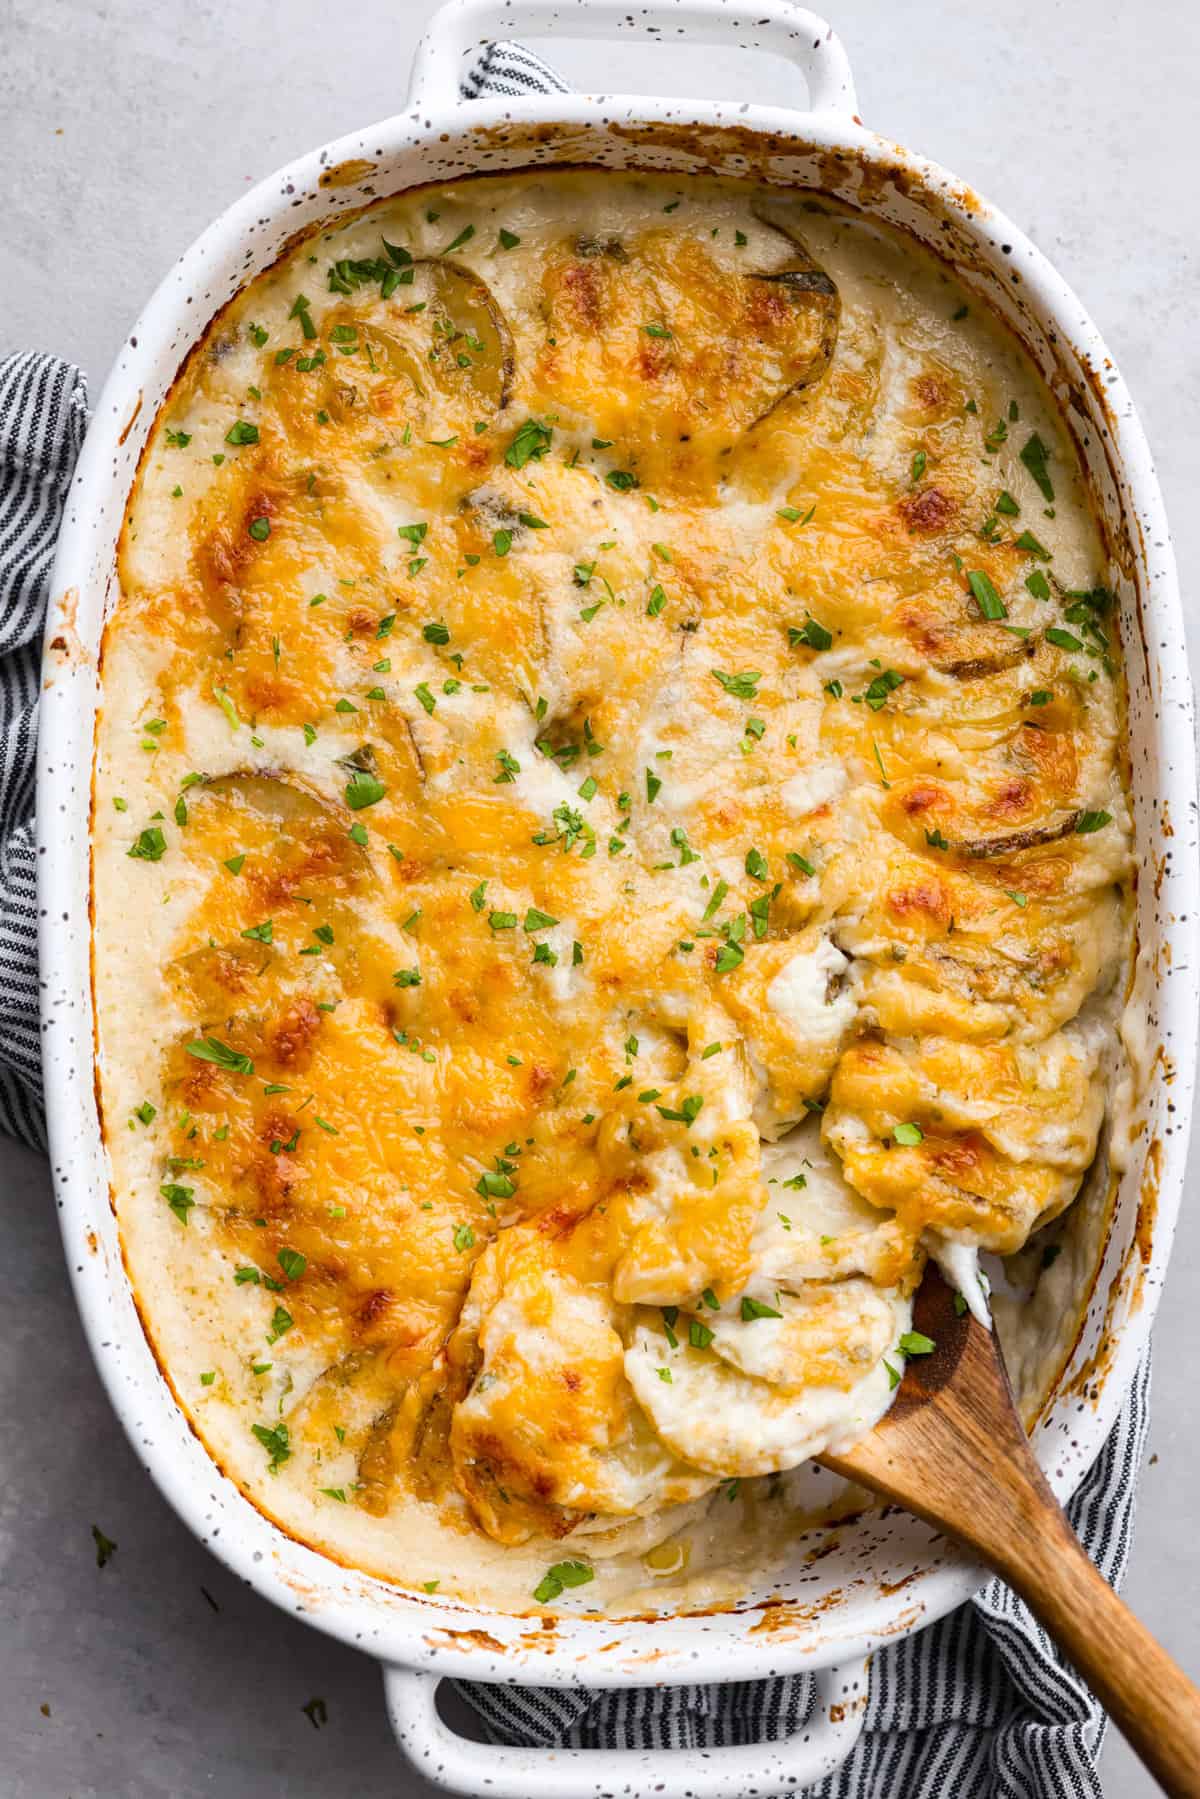 Top view of au gratin potatoes in a white baking dish with a wood serving spoon.